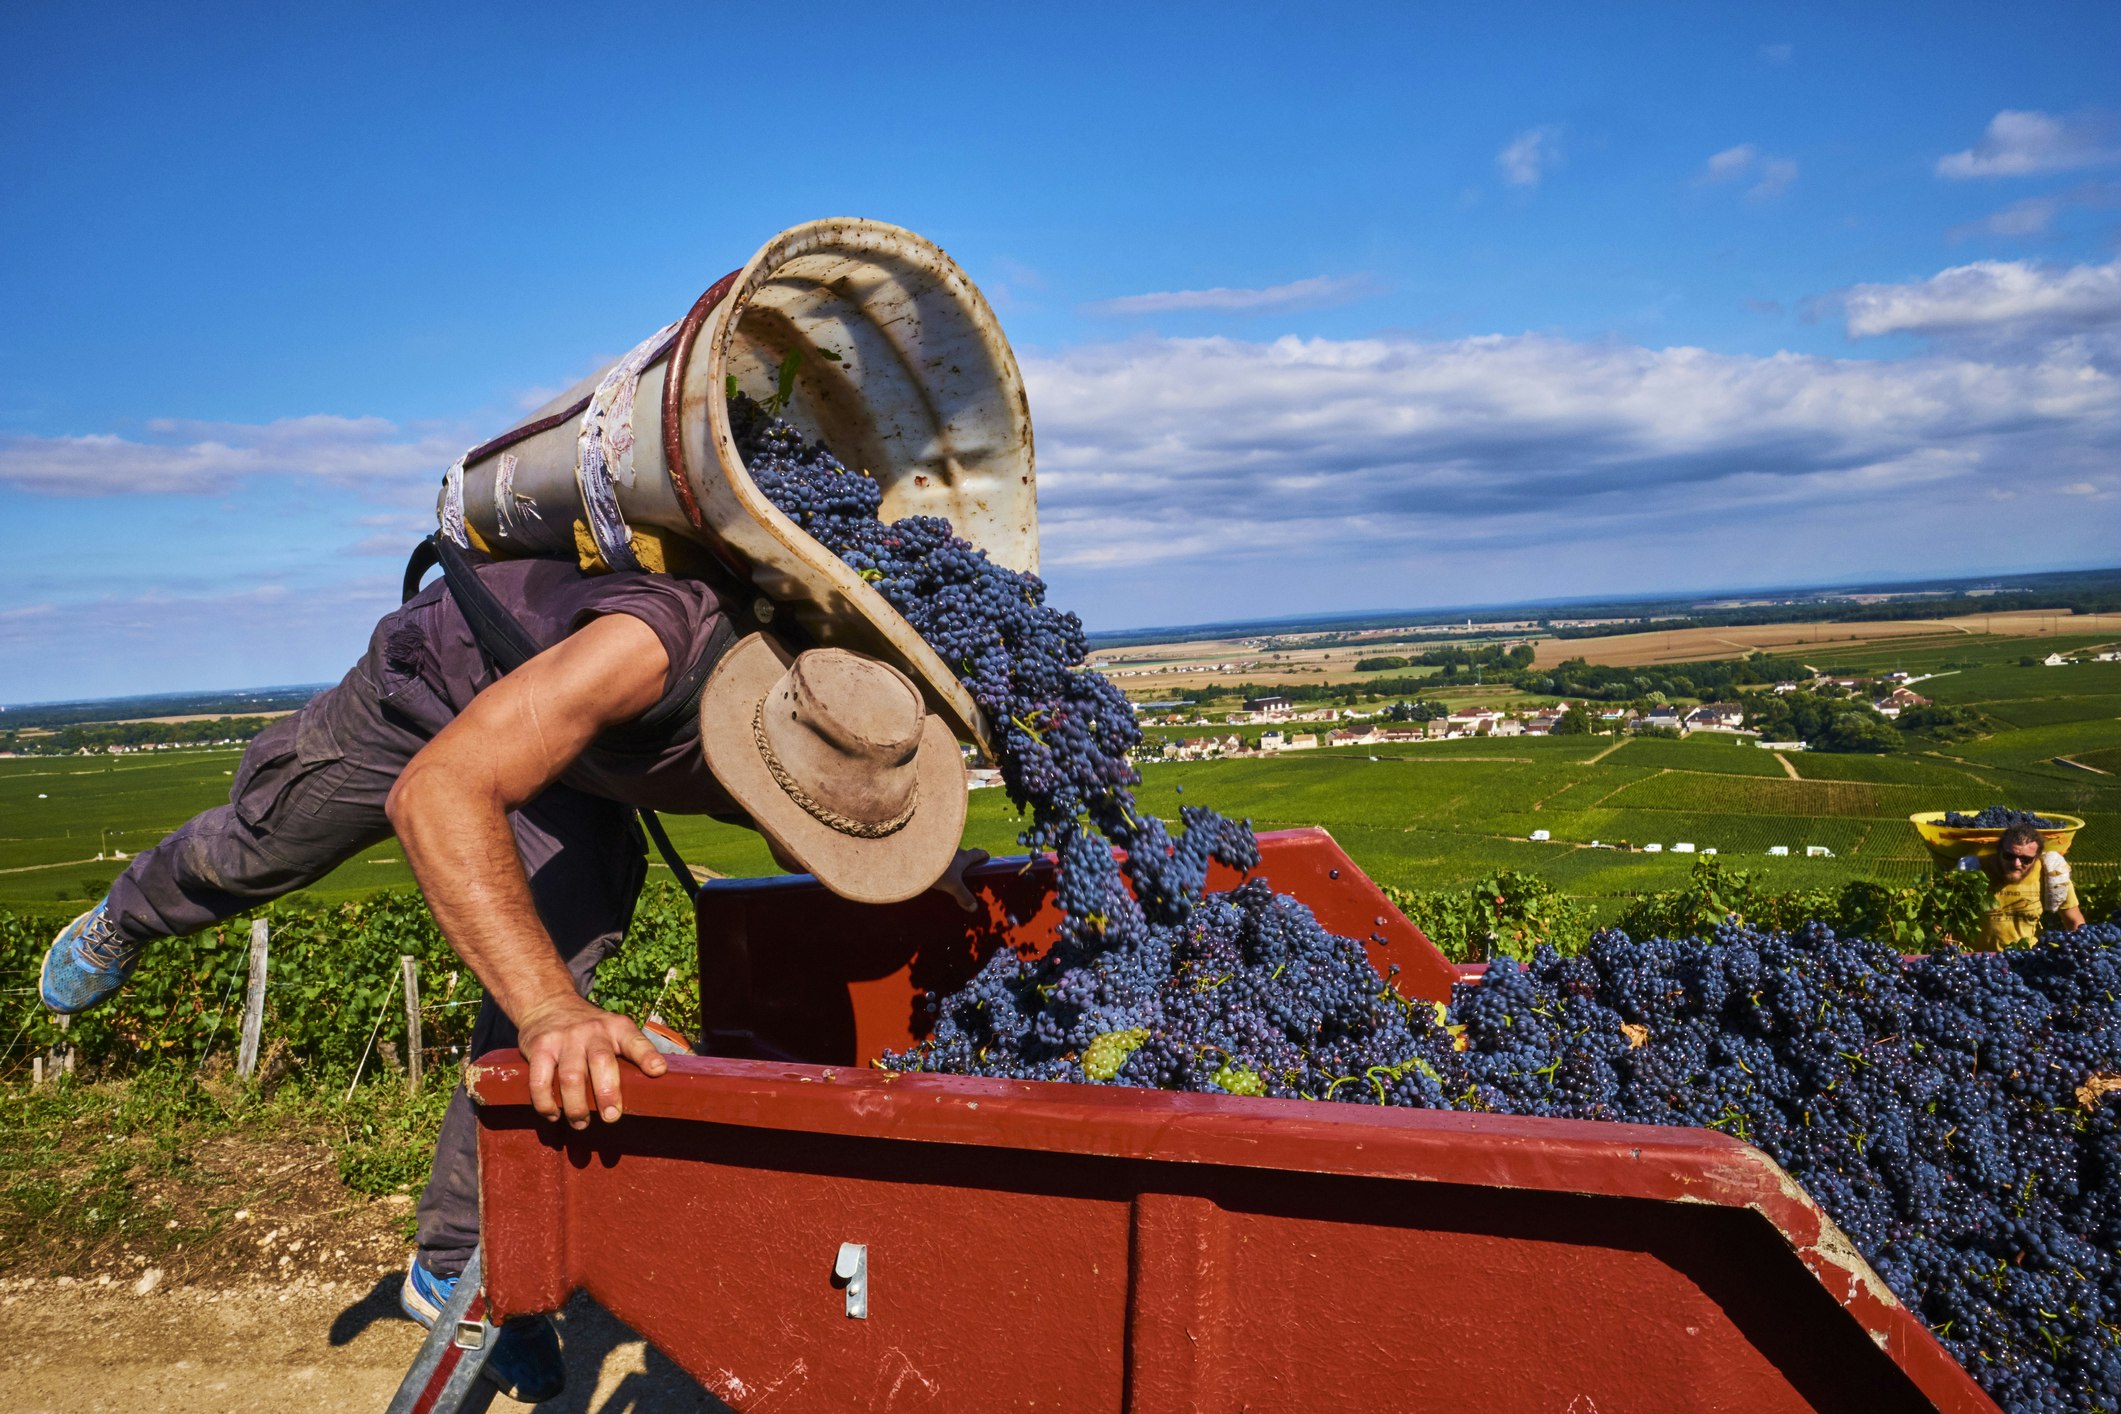 A man with a container full of grapes on his back leans over a truck and empties them into it